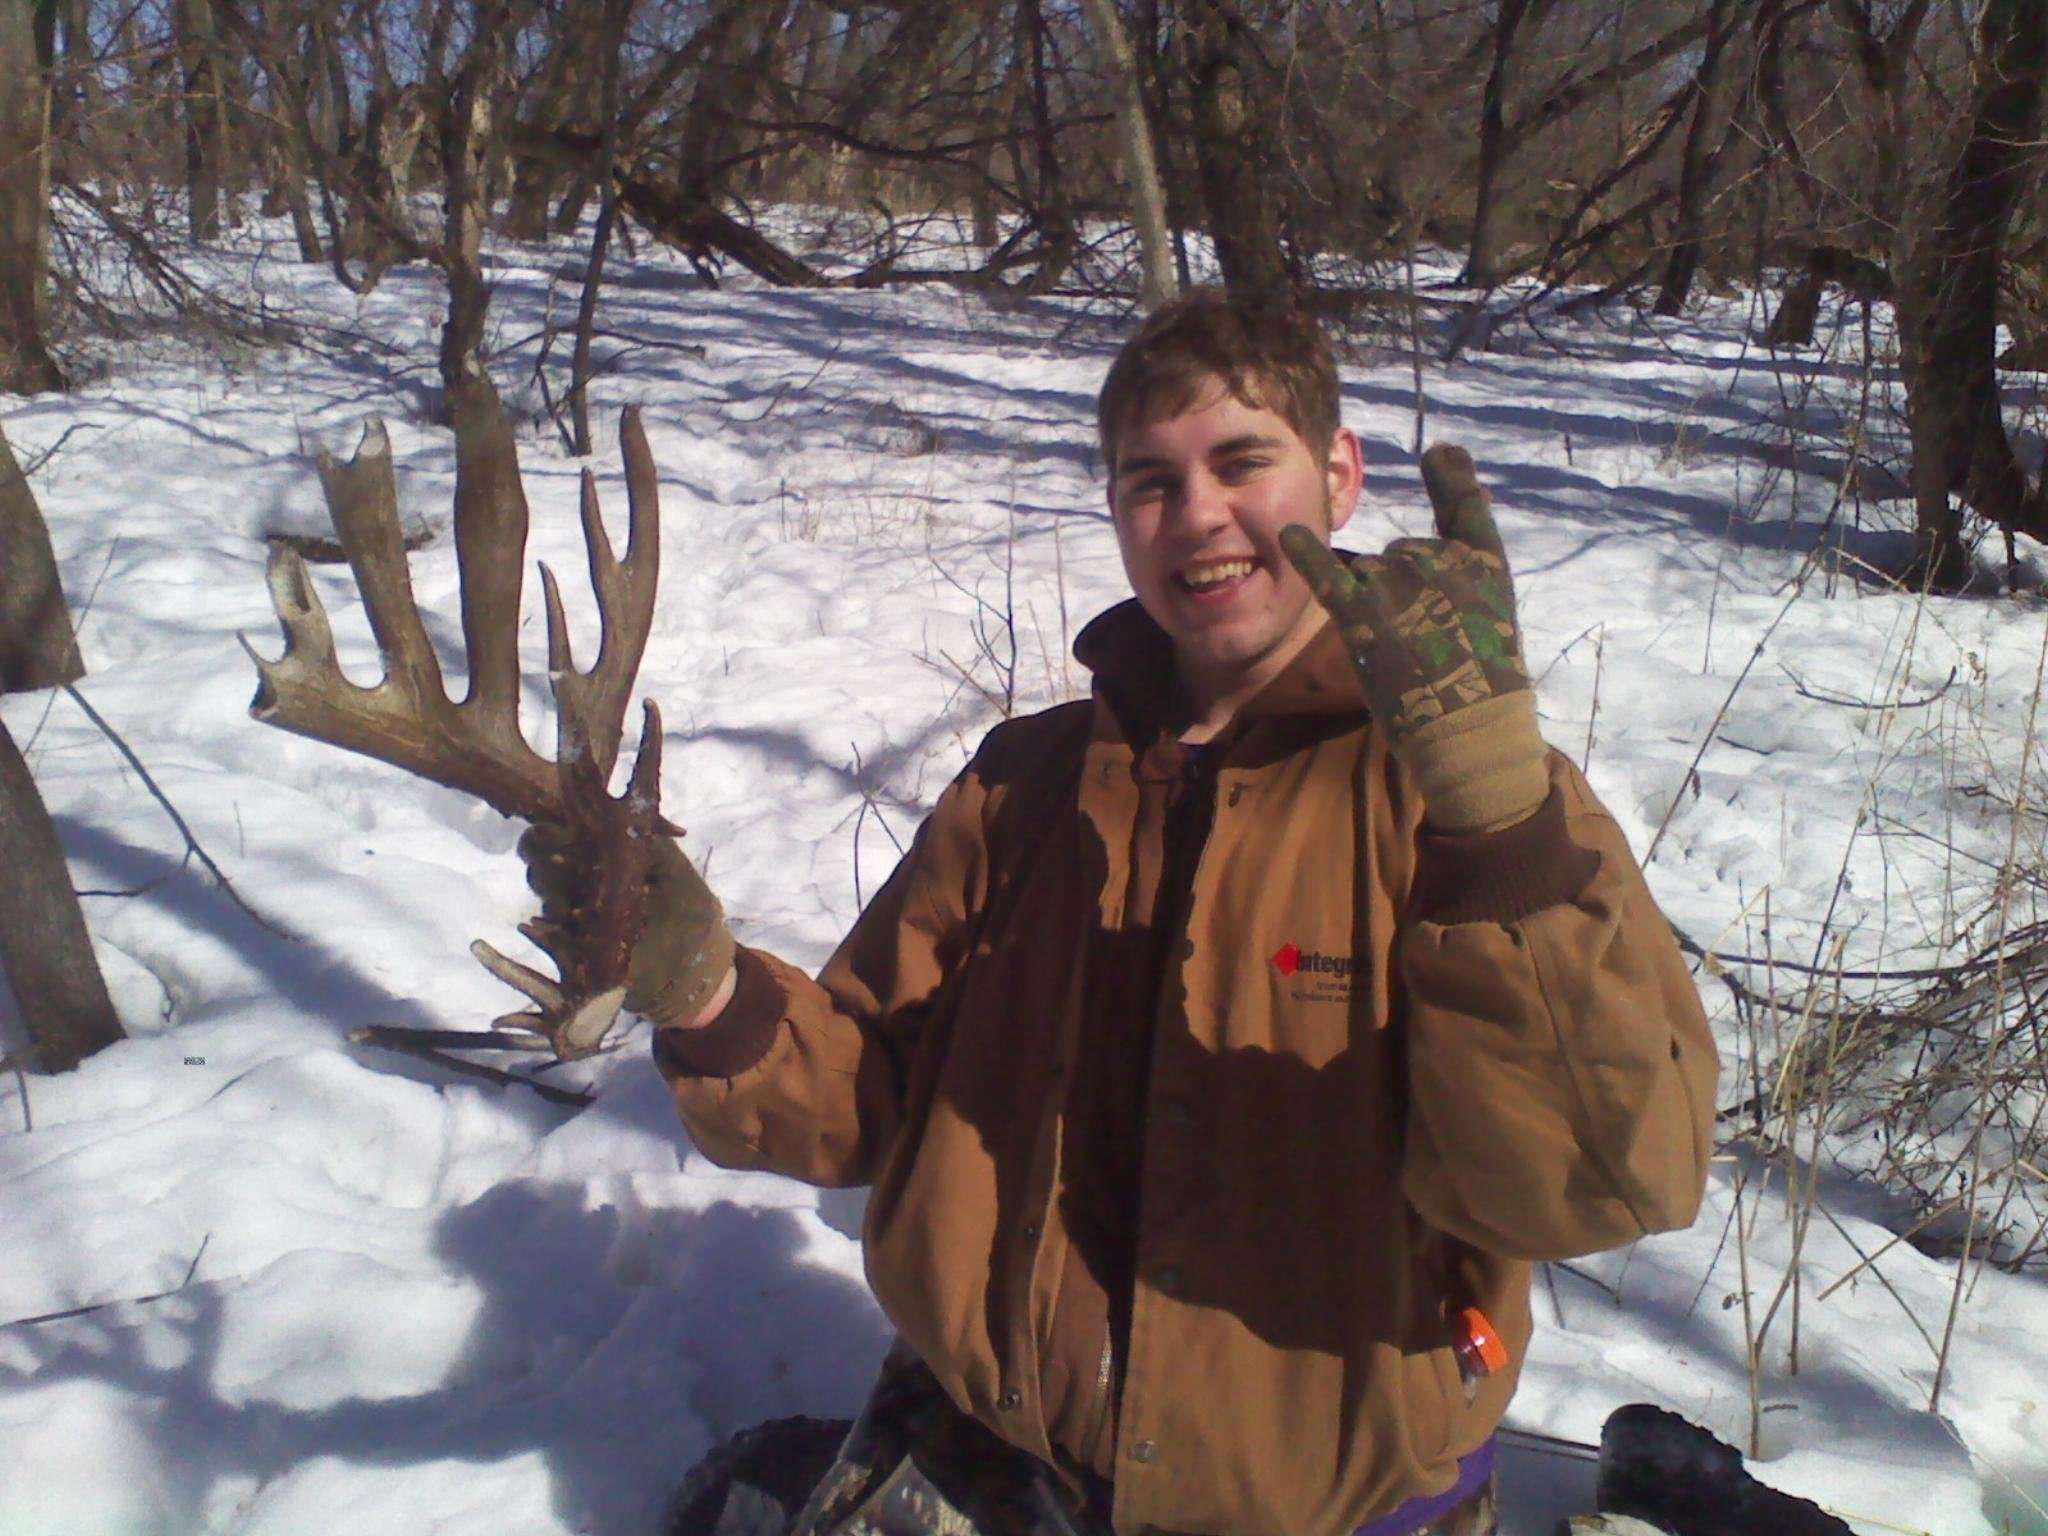 Finding a buck like this on public land and then picking up its sheds is quite an accomplishment.